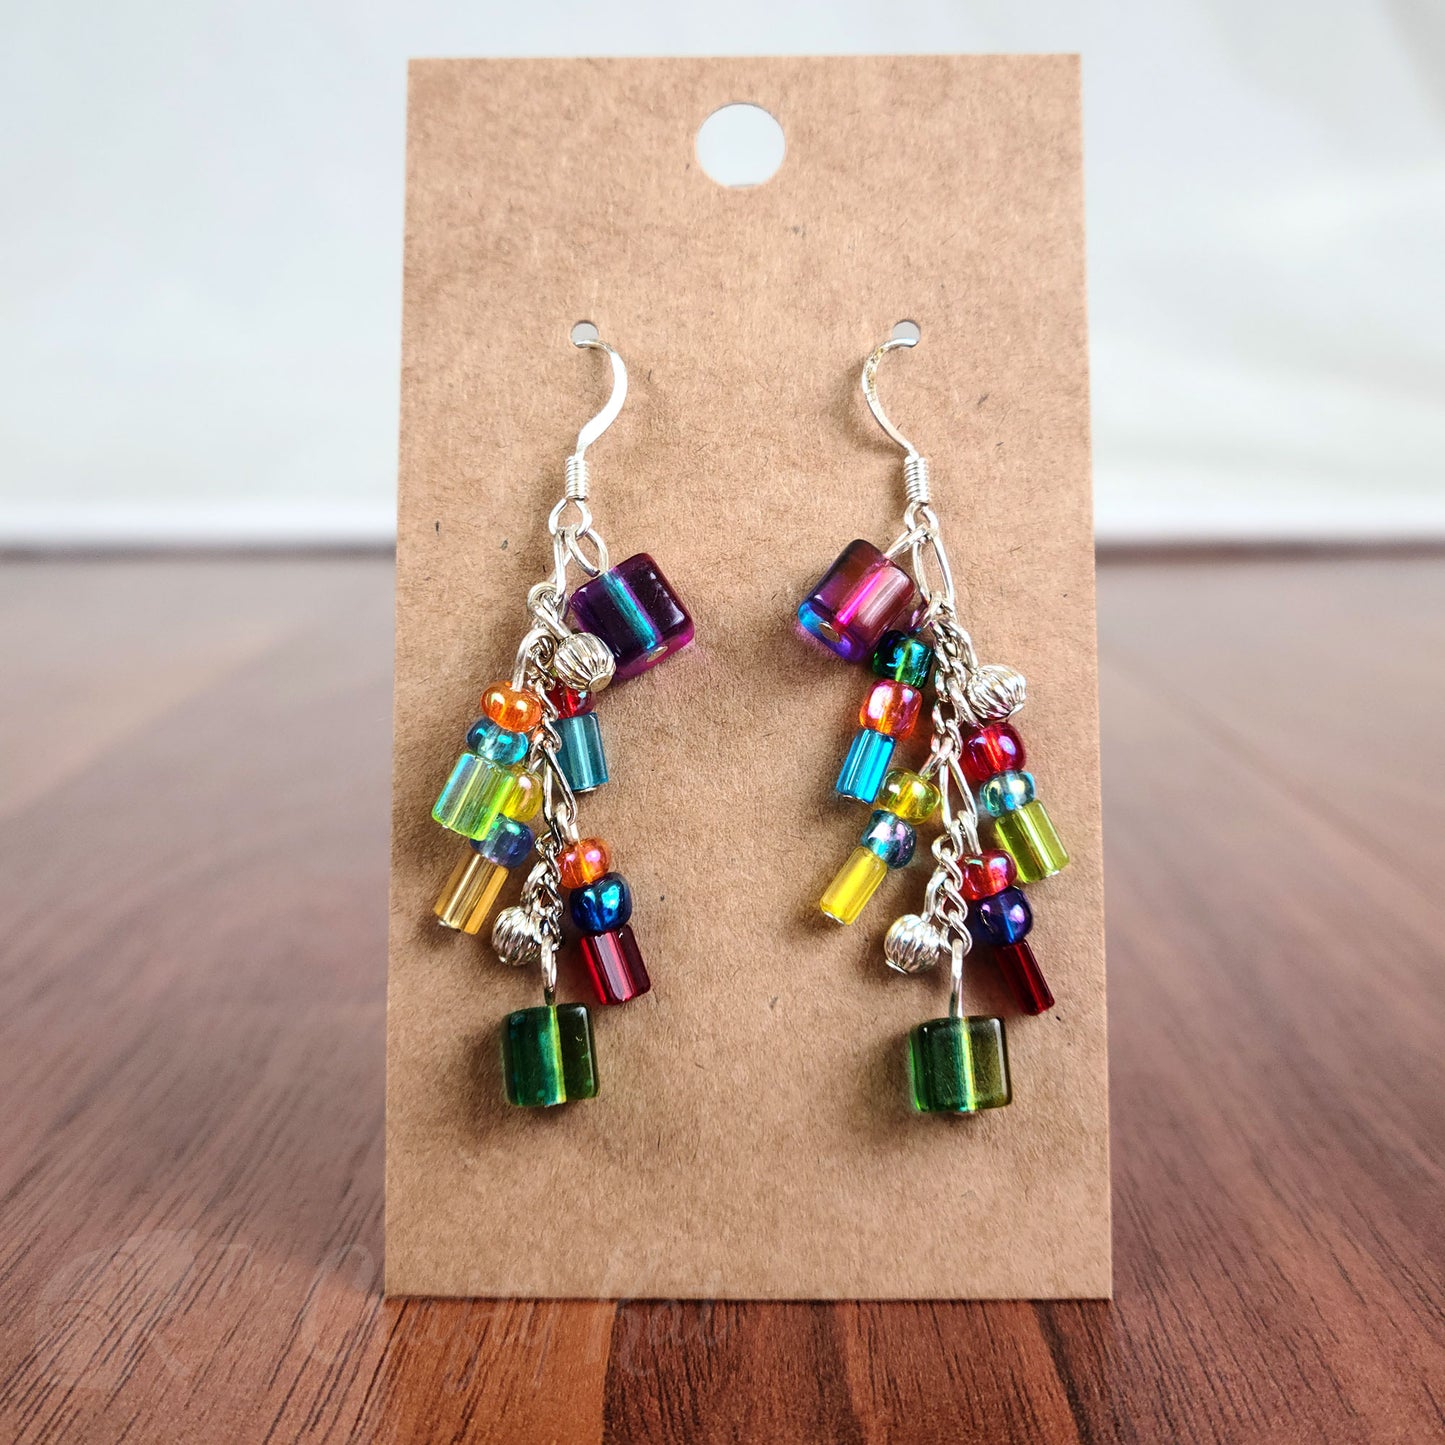 Cascading earrings made of green, red, blue, purple, pink, and orange pressed glass beads with silver beads and fittings